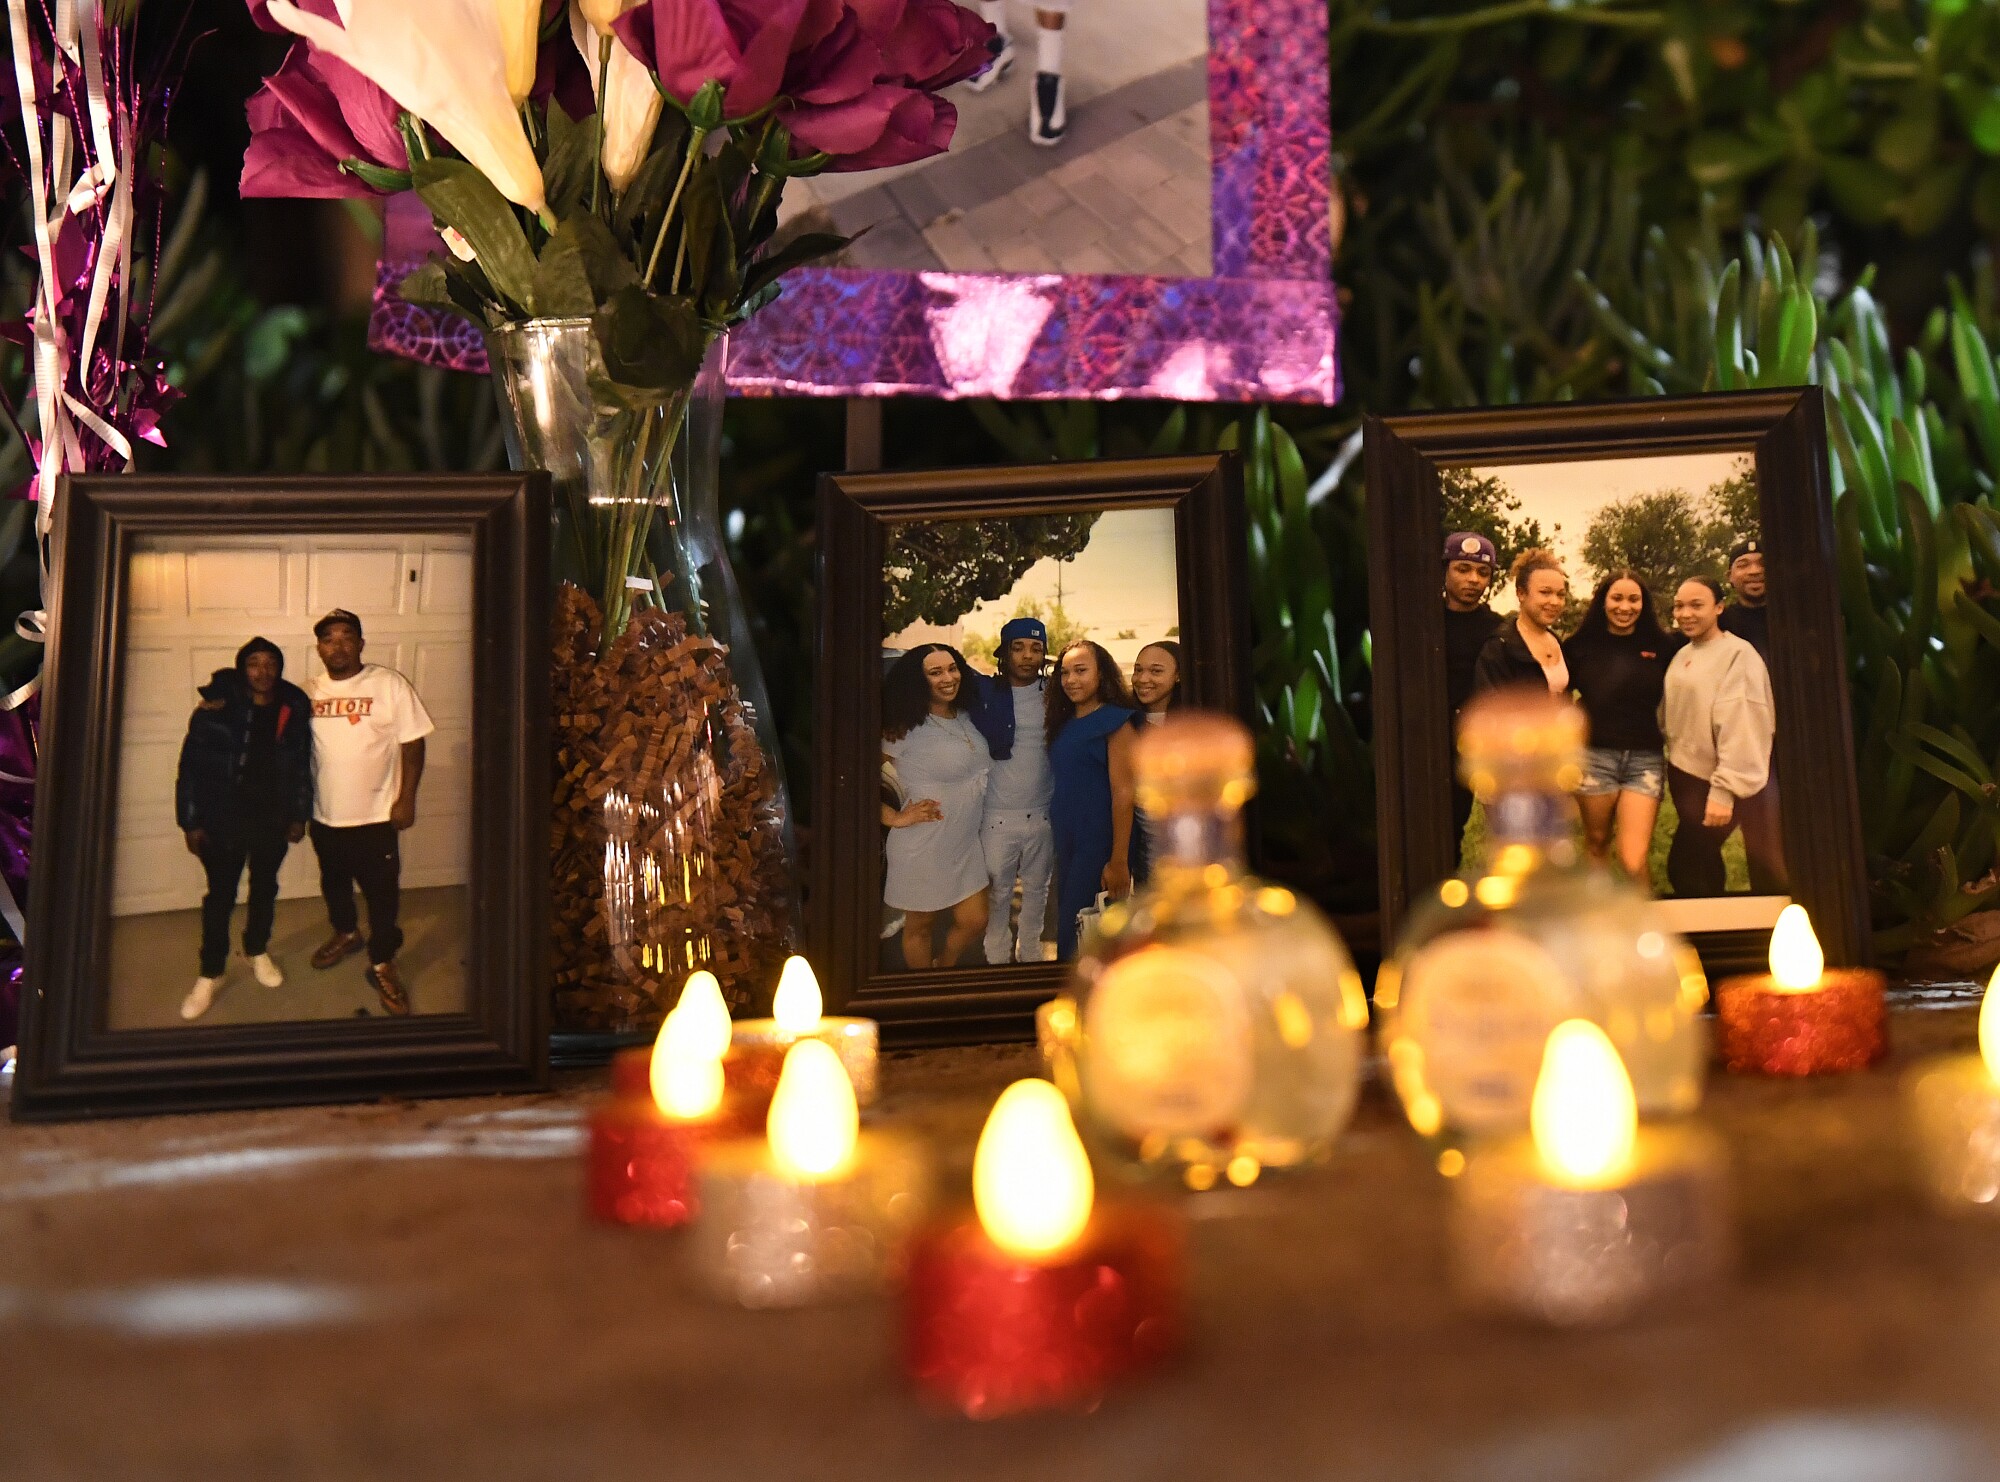 Candles and framed photos of the shooting victims